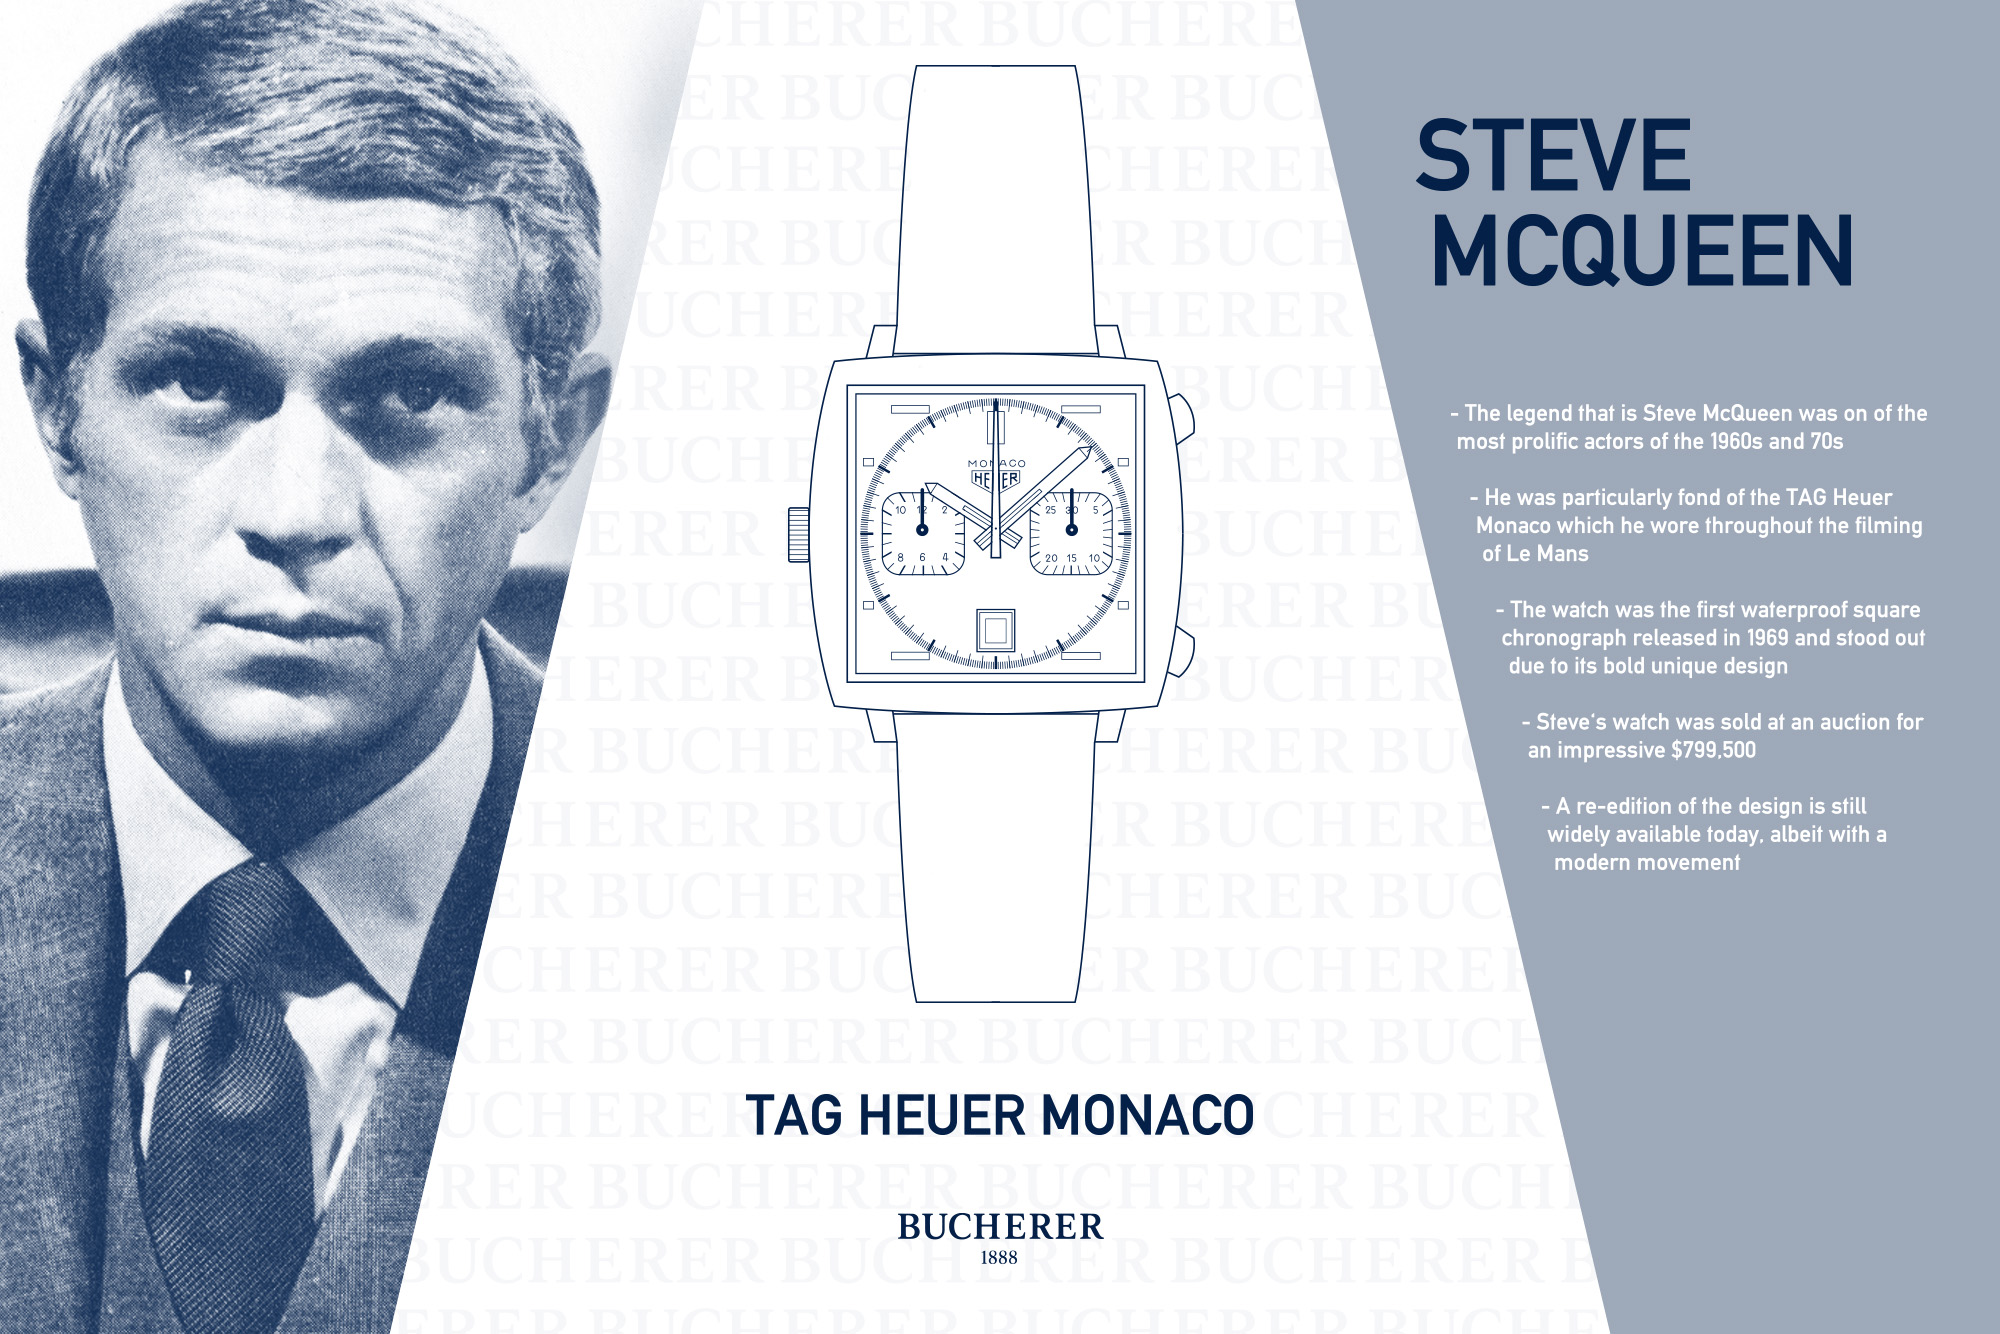 steve-mcqueen-and-his-tag-heuer-monaco-watch